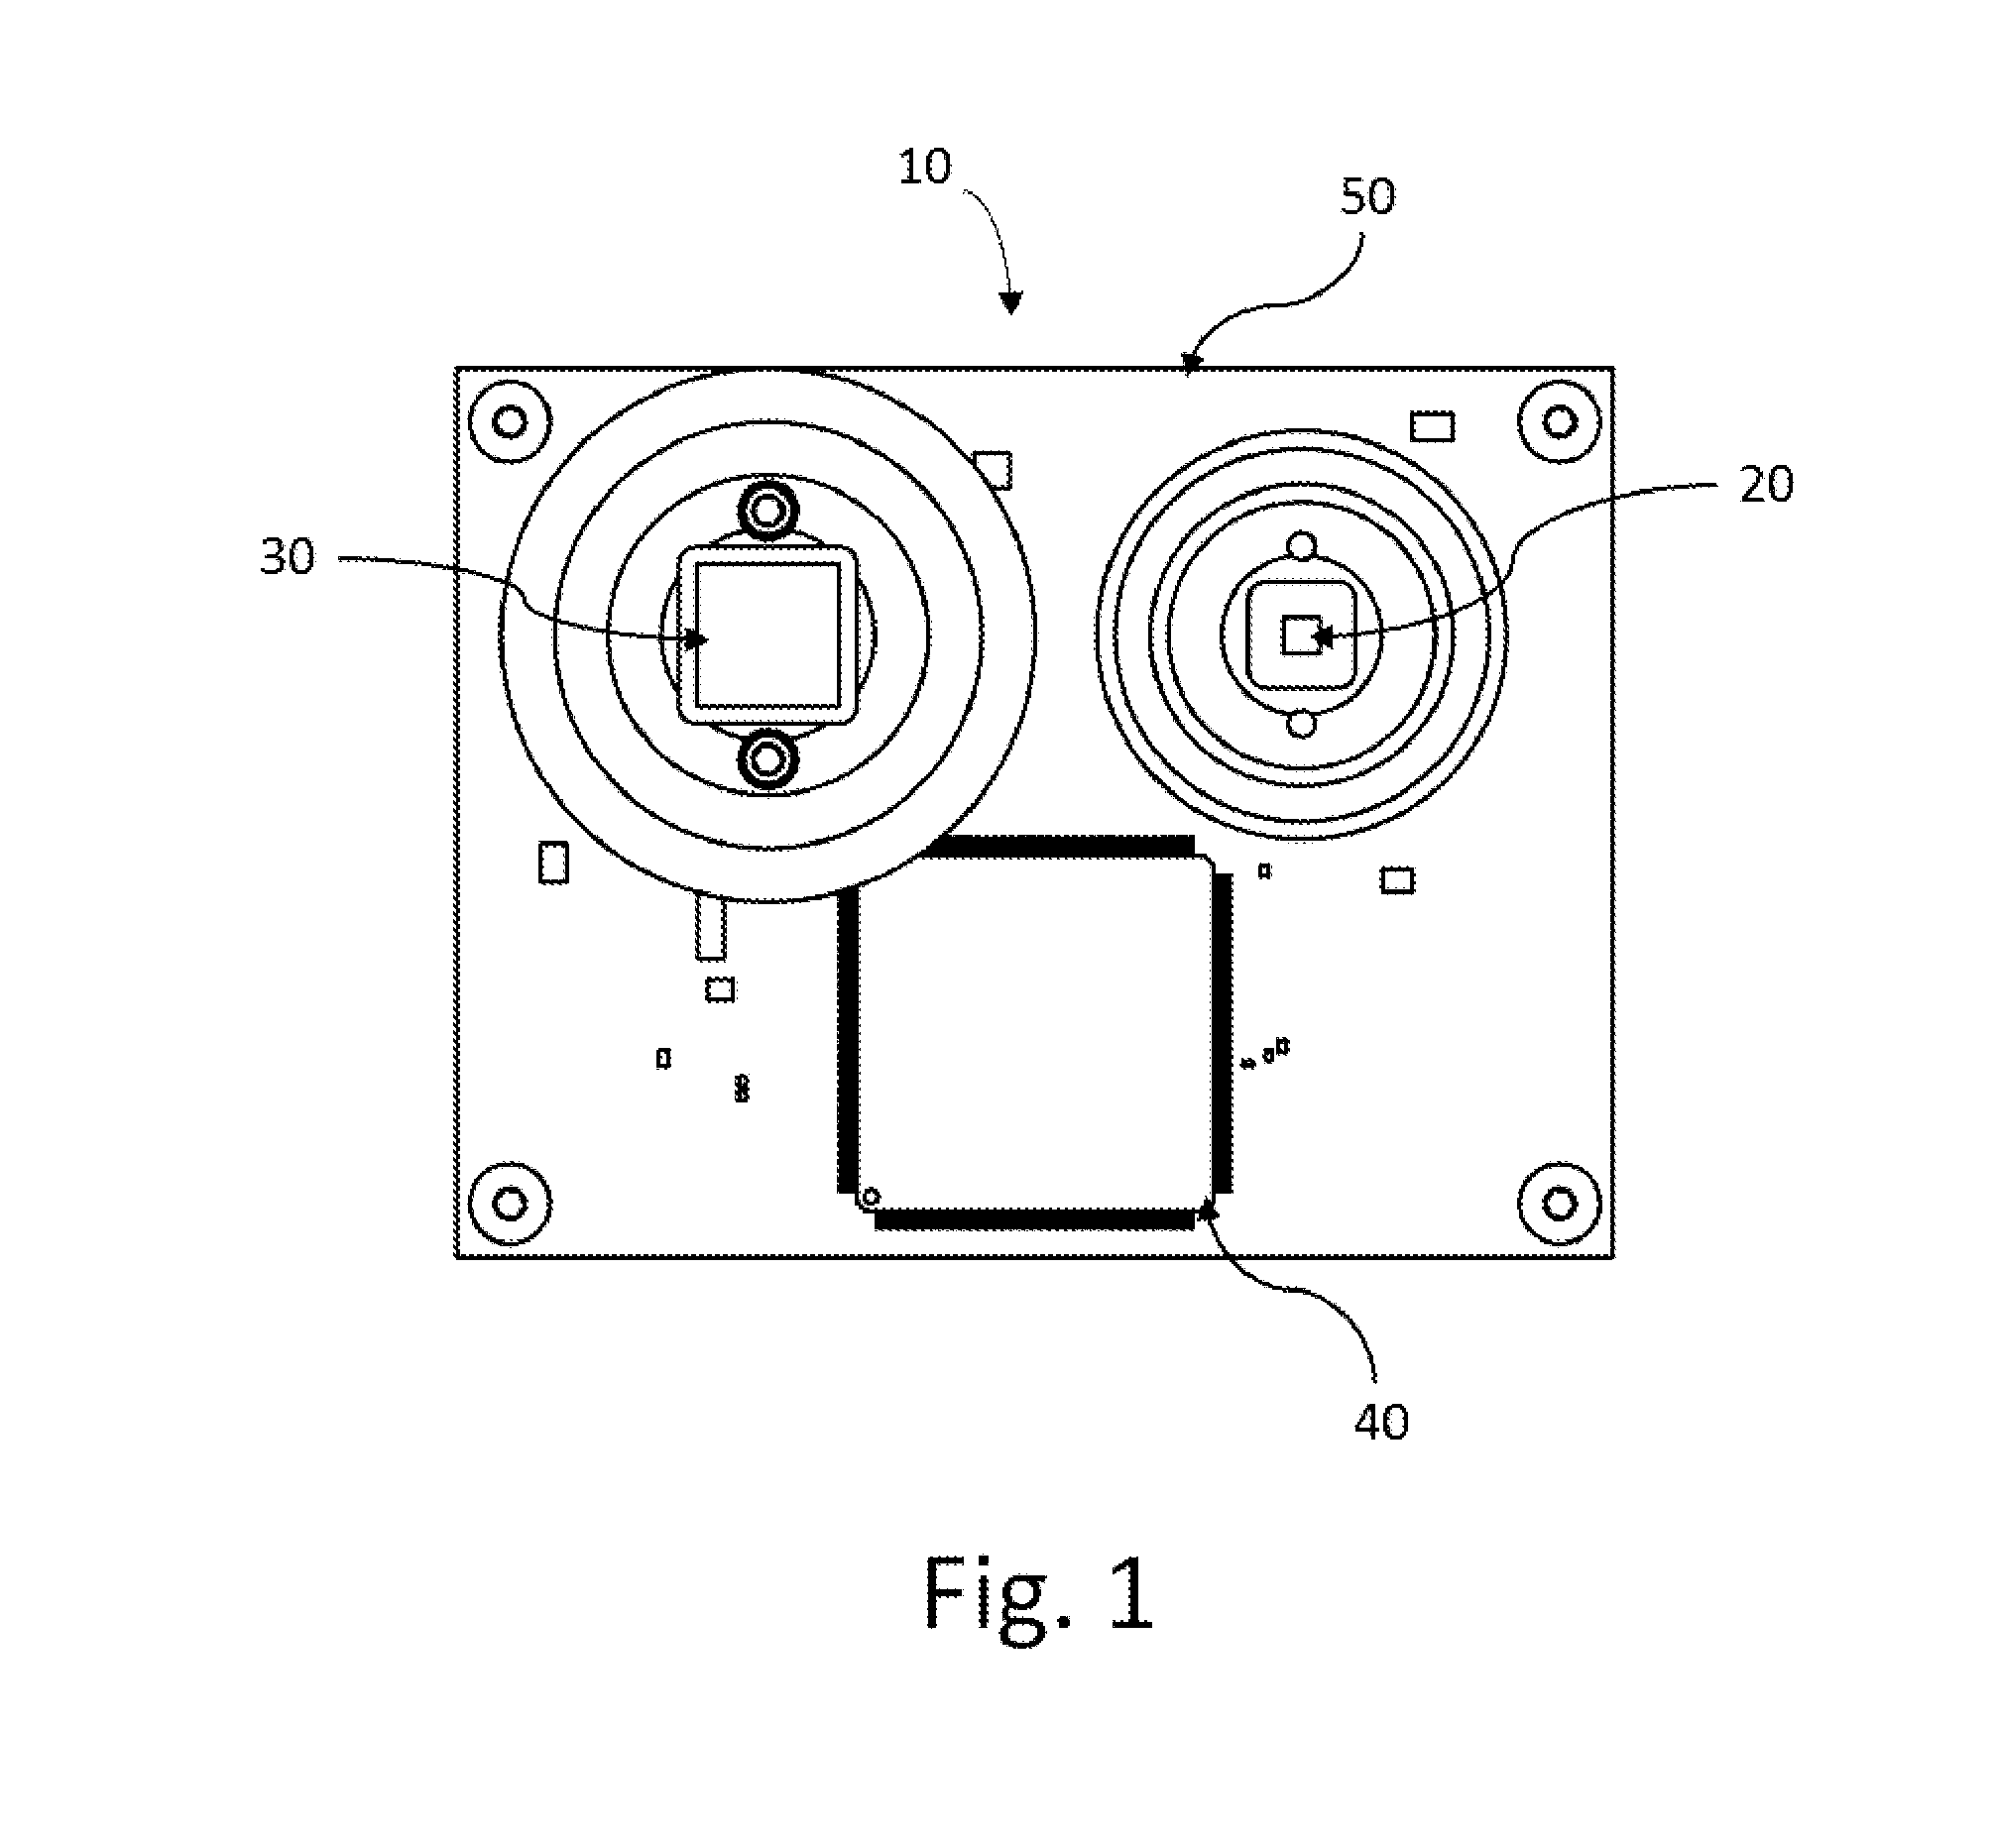 Optical phased array lidar system and method of using same